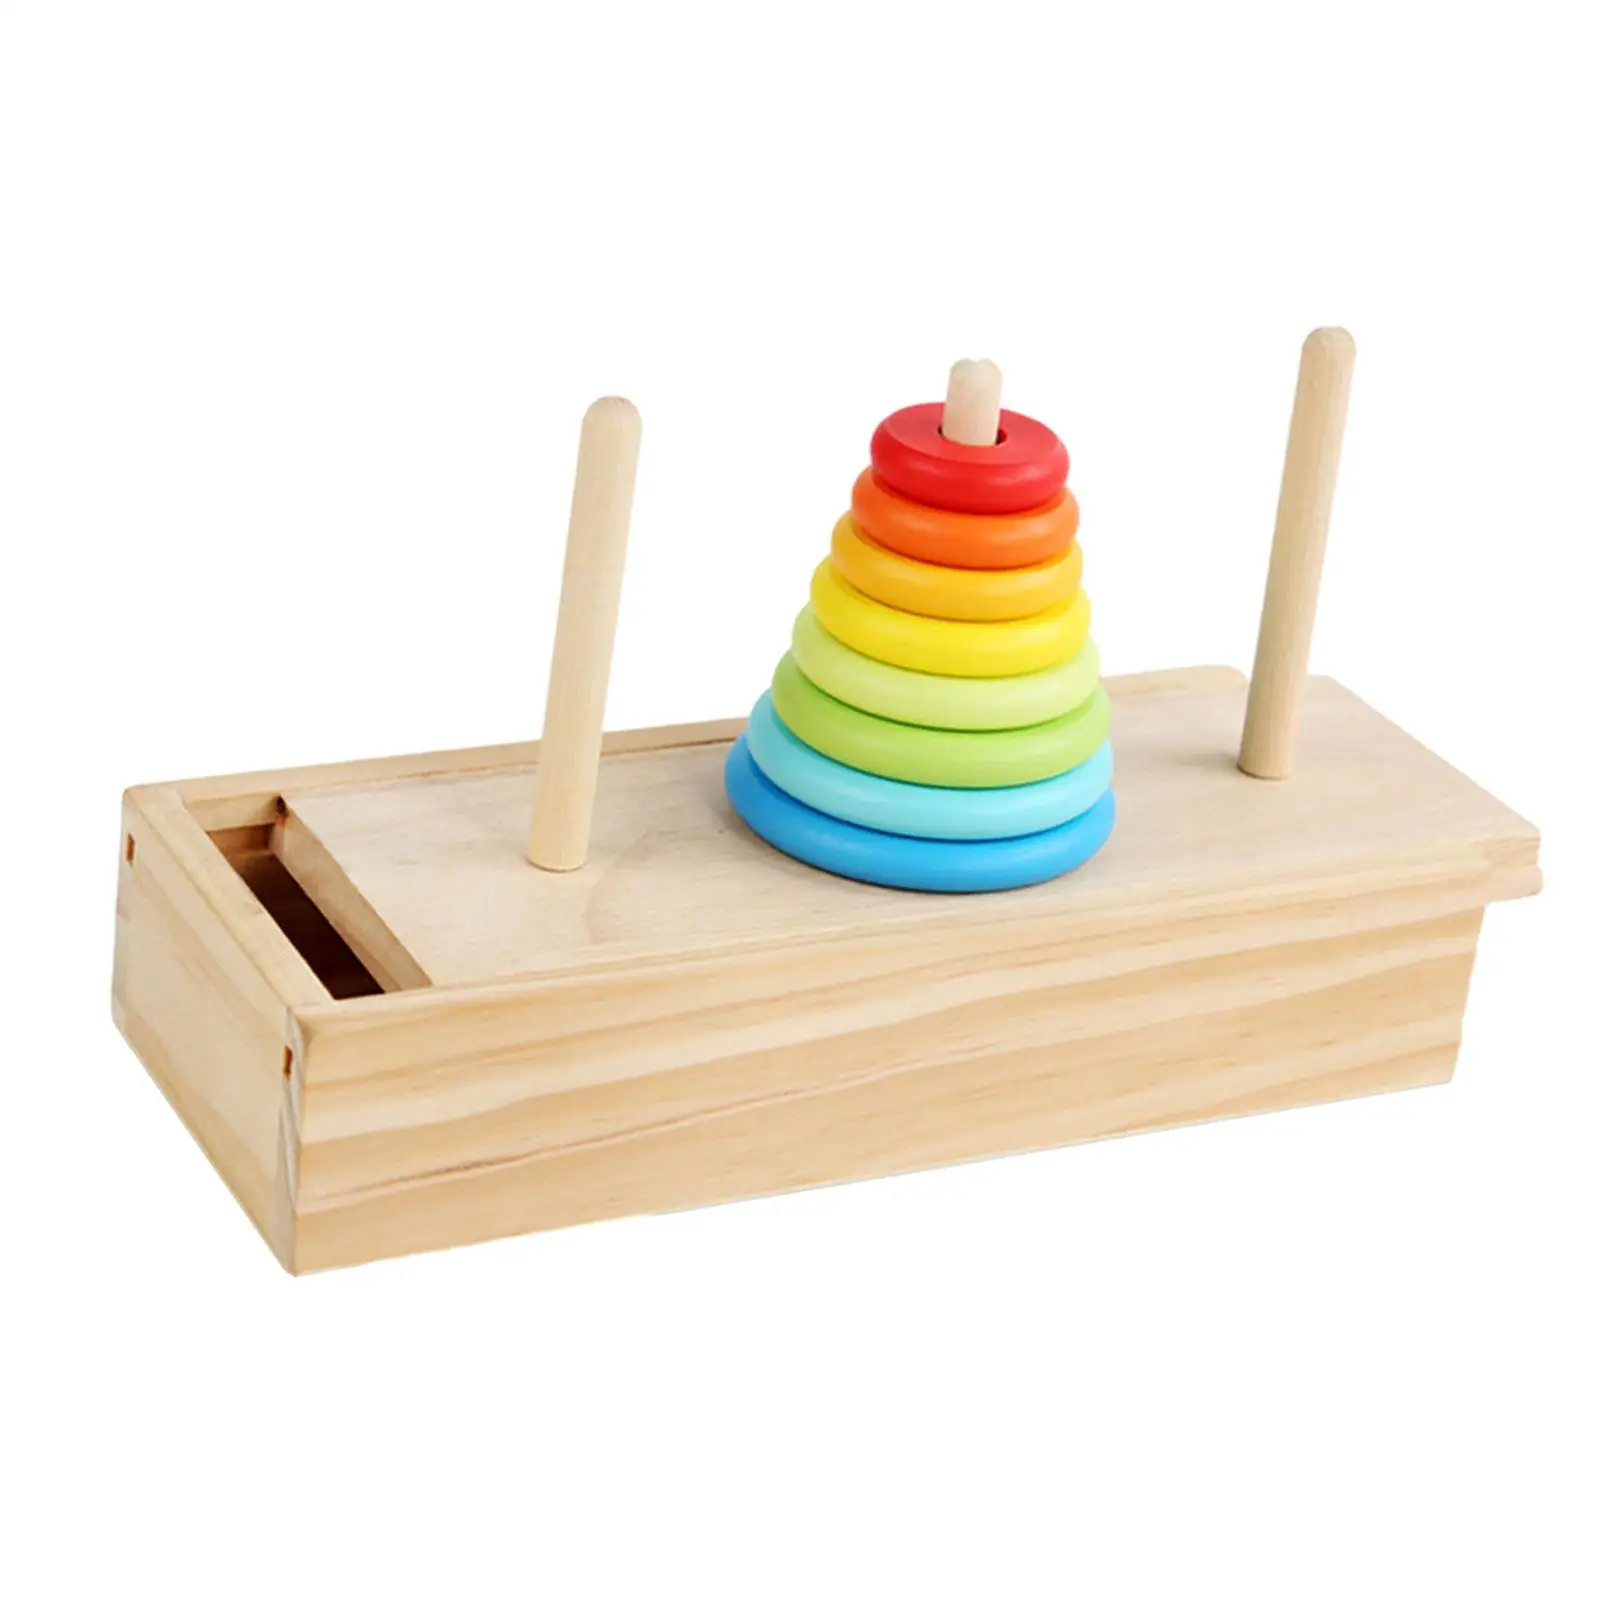 Wooden Stacking Tower Color Cognition Brain Training Toy Intellectual Toy Portable for Baby Kids 3 Year Old and up Boys Girls